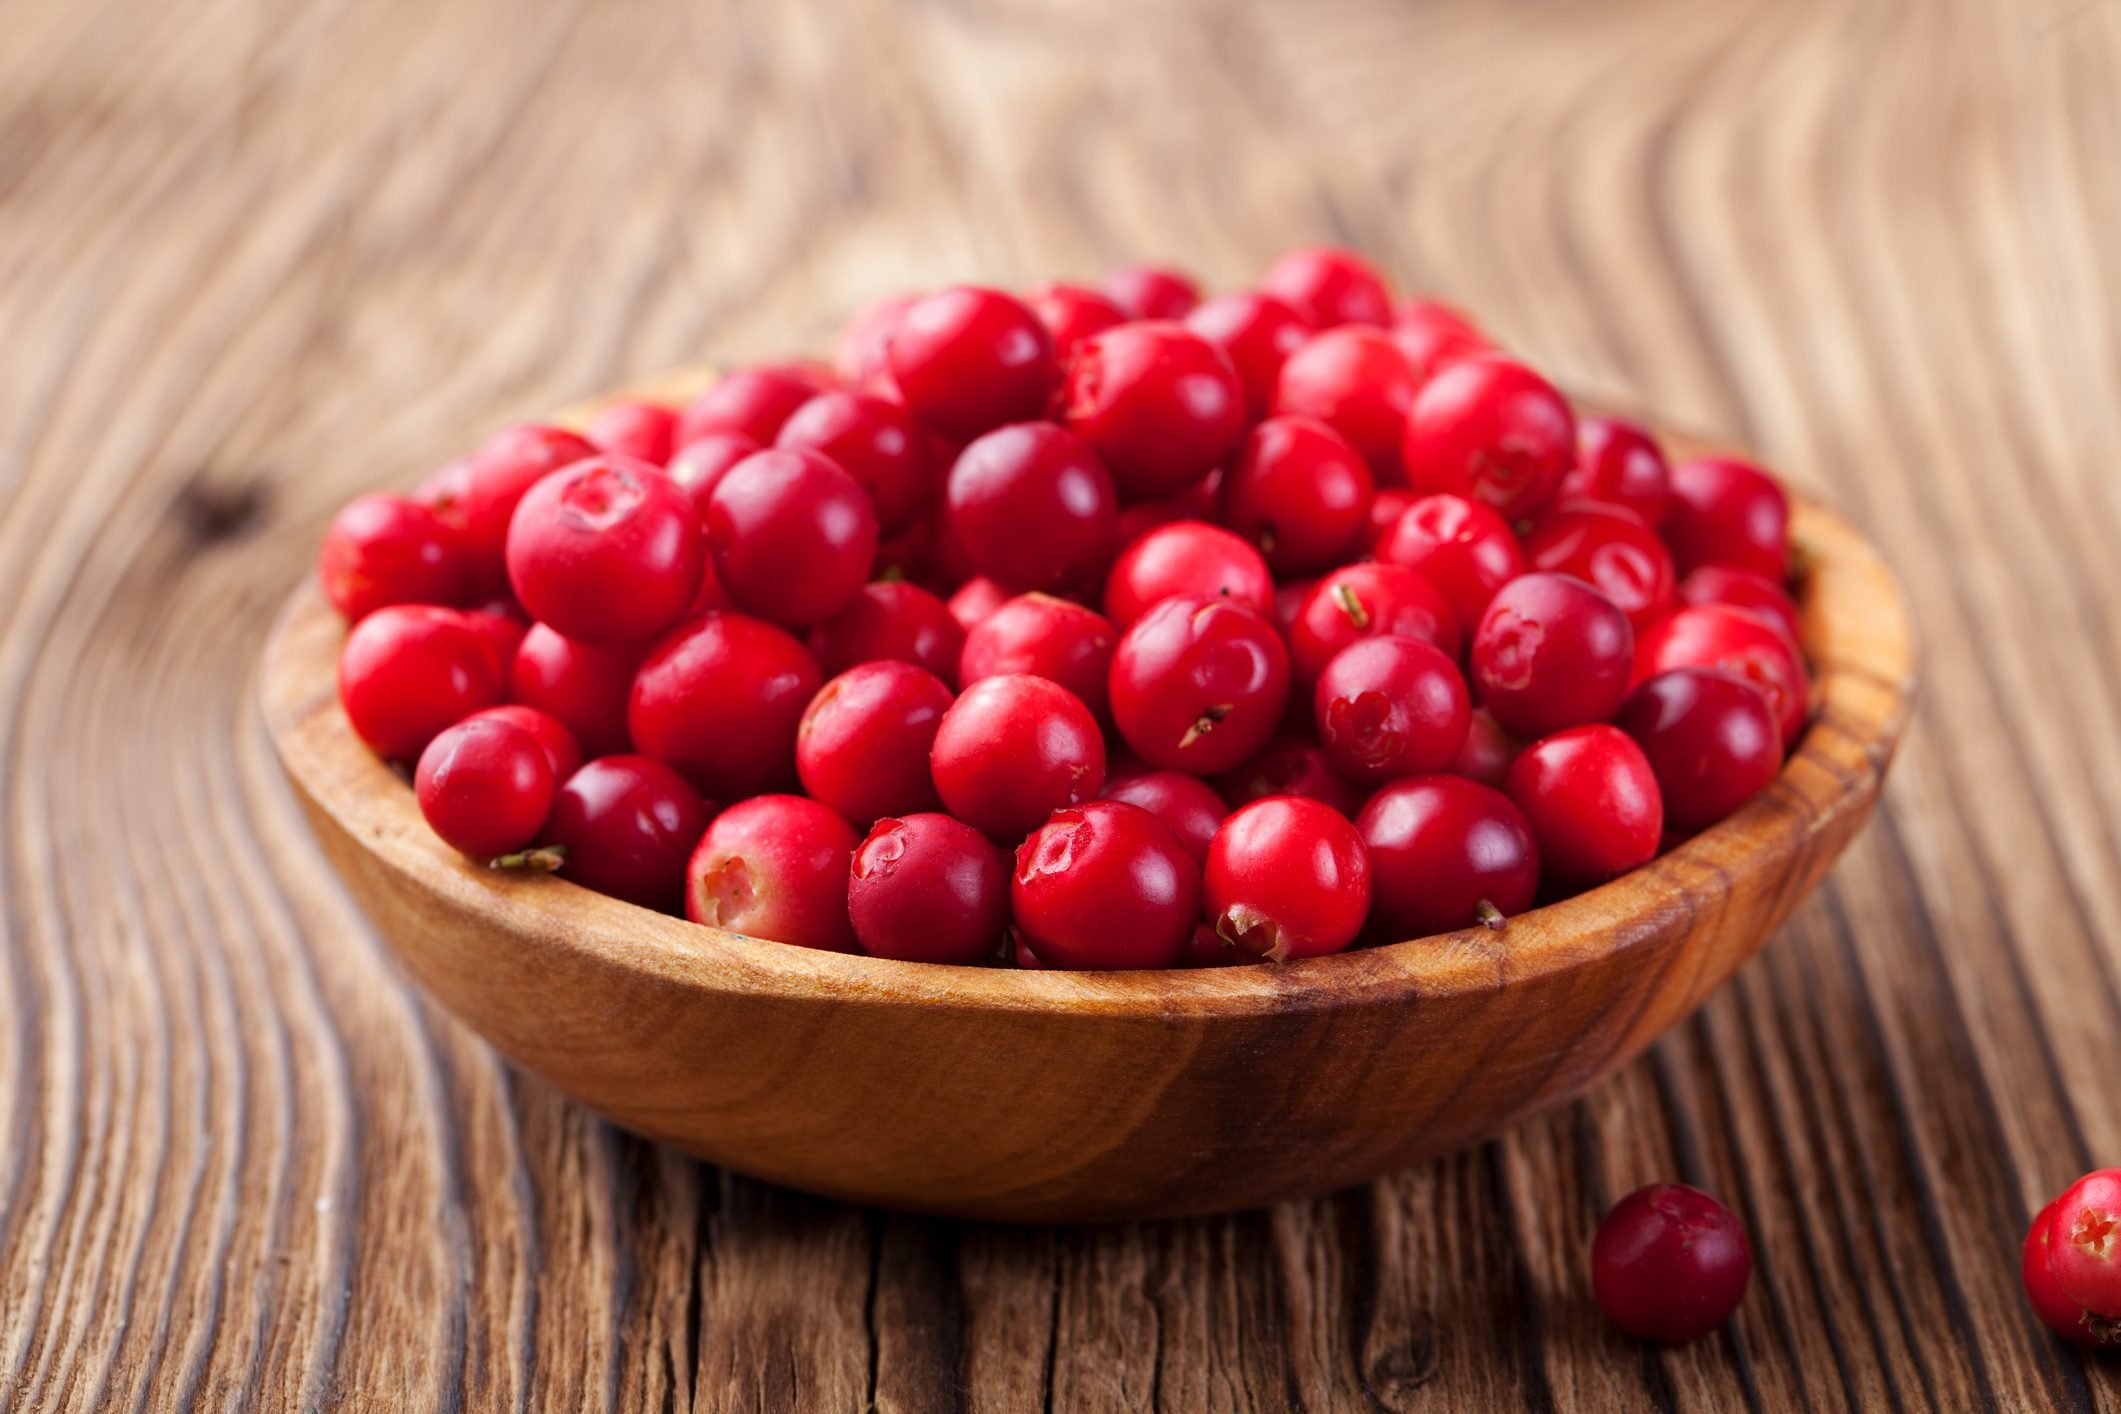 Can Dogs Eat Cranberries? 13 Things to Know